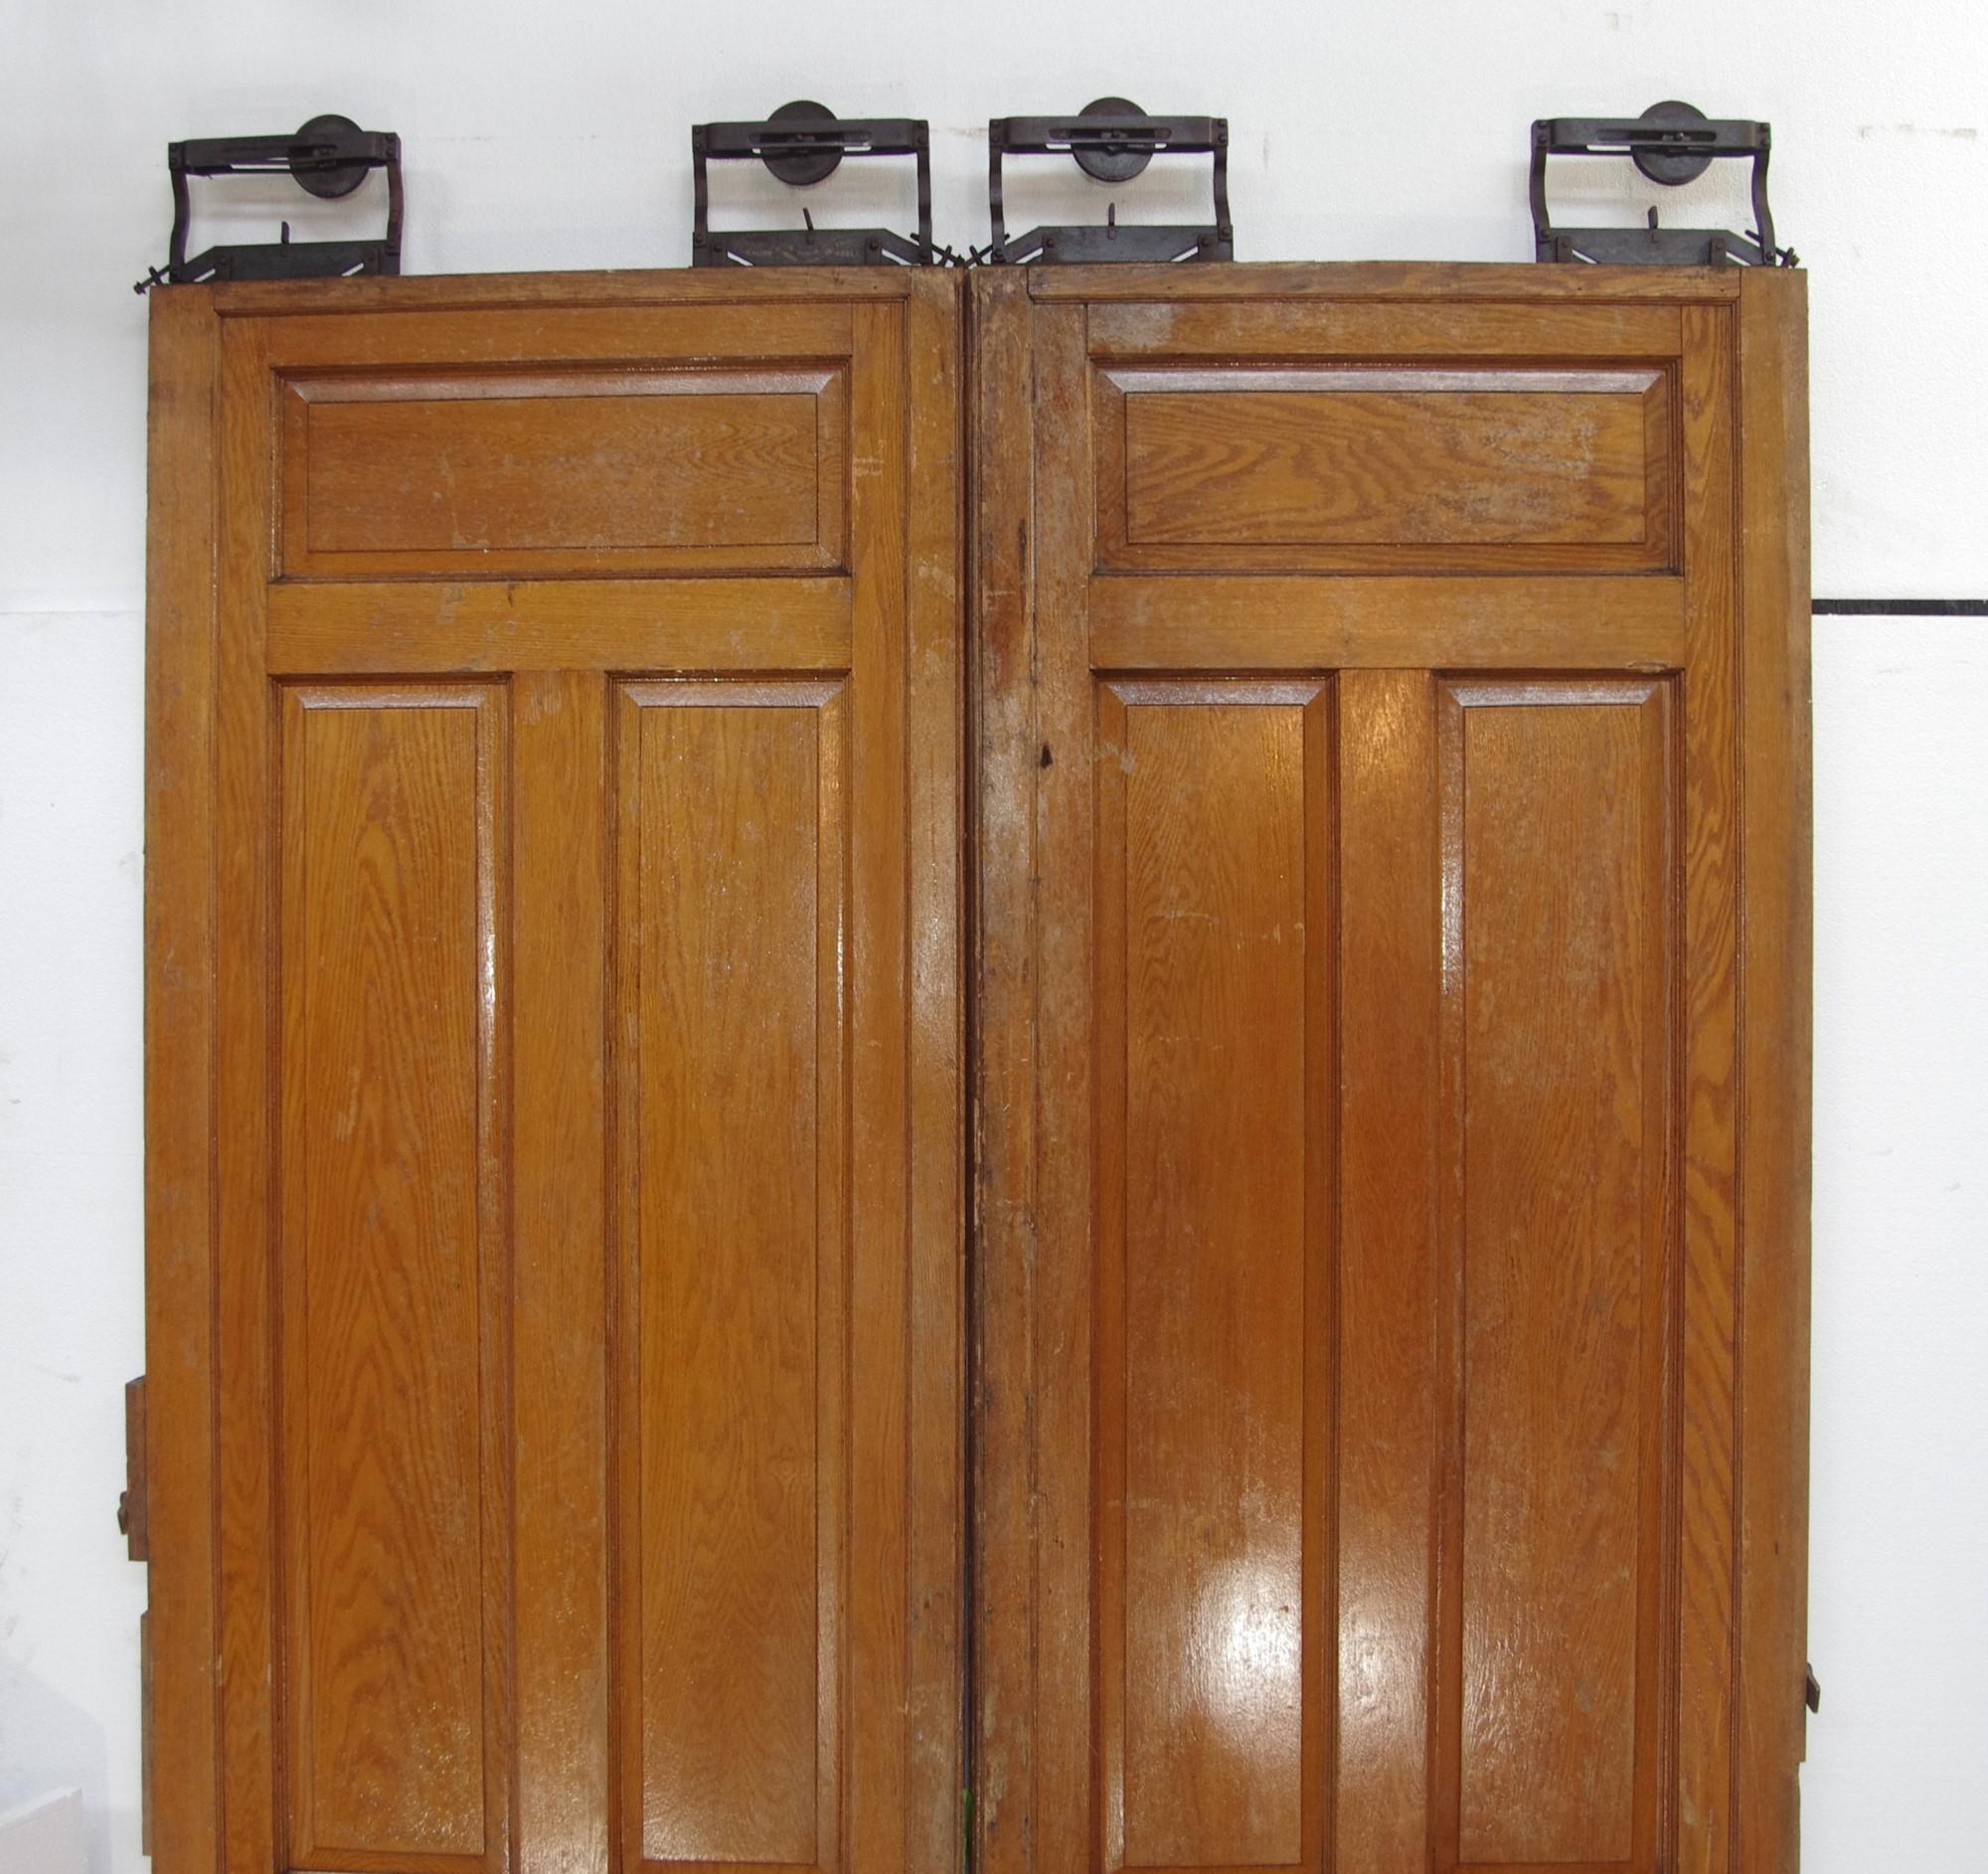 Antique six panel pocket door set with medium tone wood complete with original wheels. Track not included. Priced as a double. This can be seen at our 400 Gilligan St location in Scranton, PA. Measures: 109.5